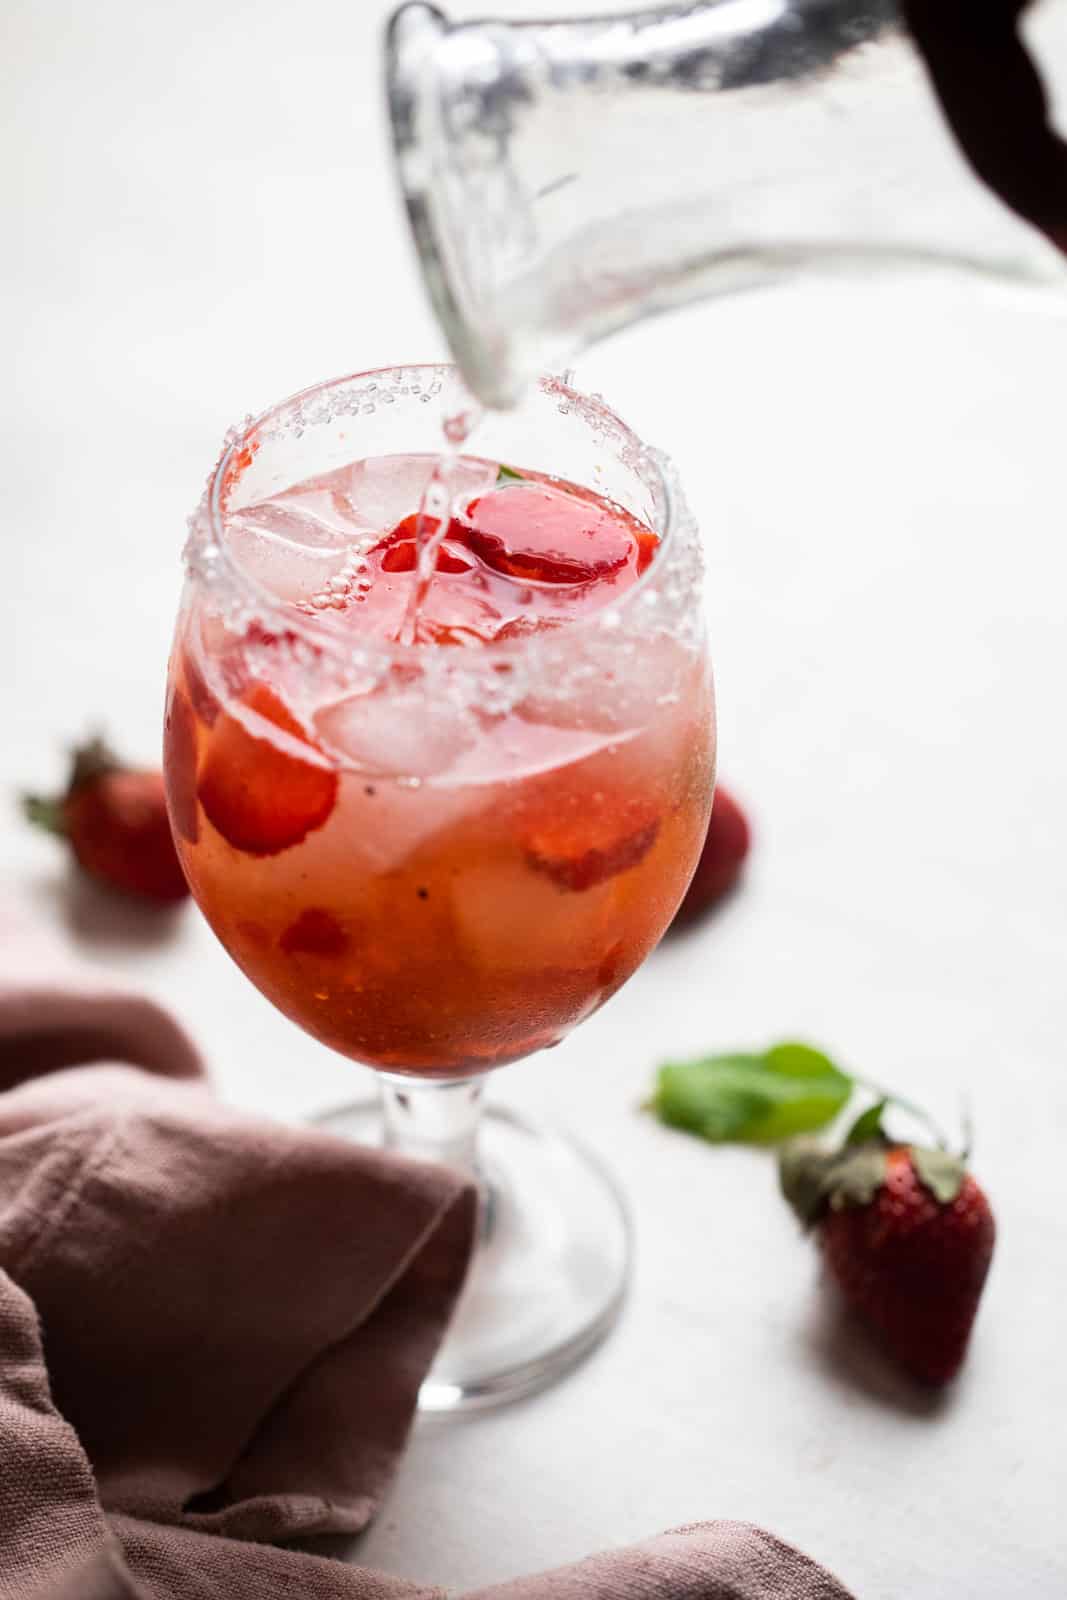 Pouring tonic water into a steam glass with gin, strawberries and ice